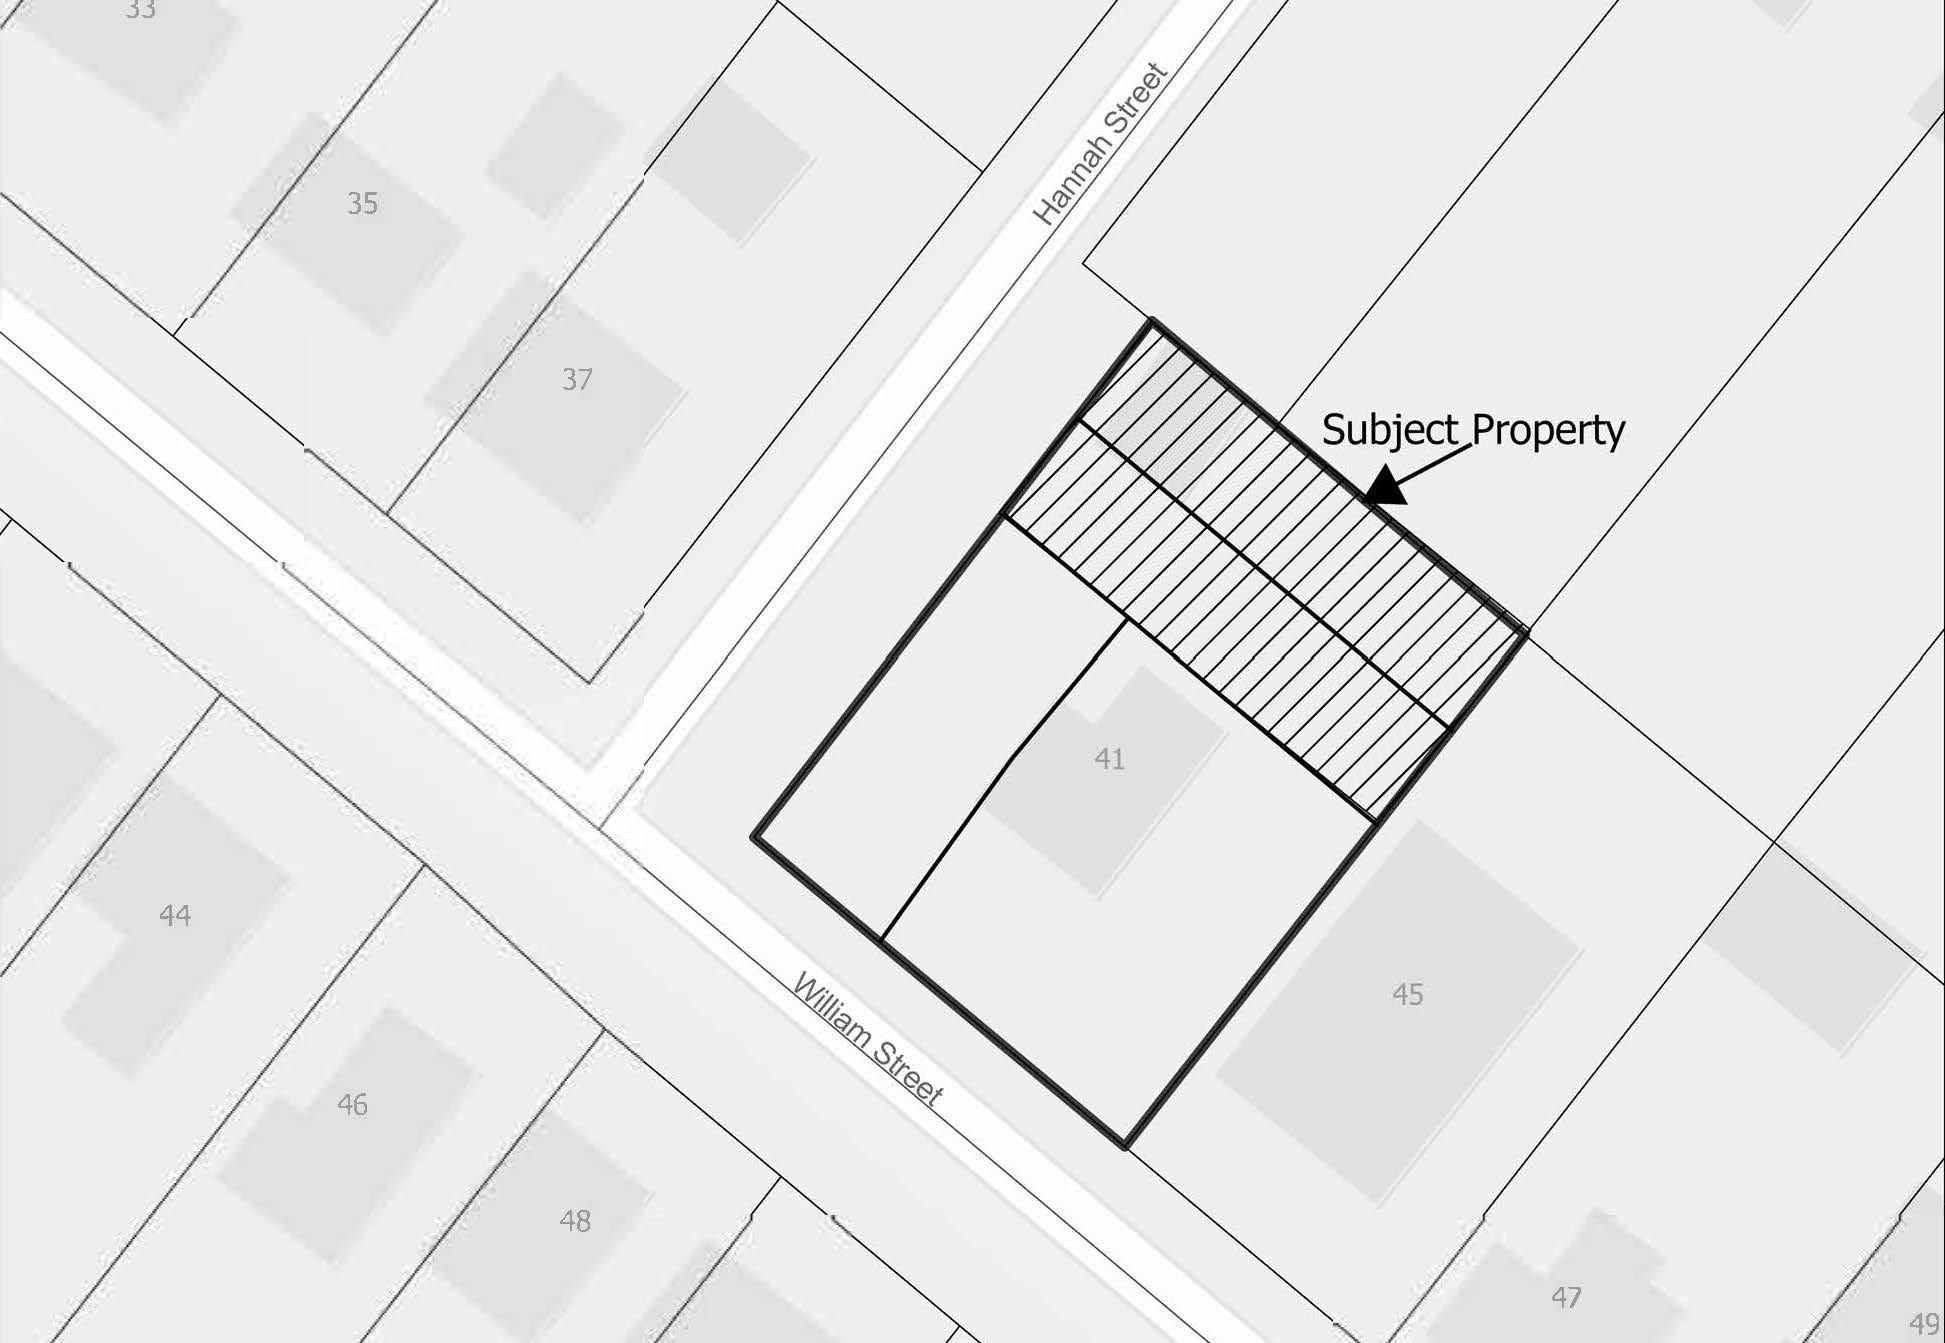 A map of the property application